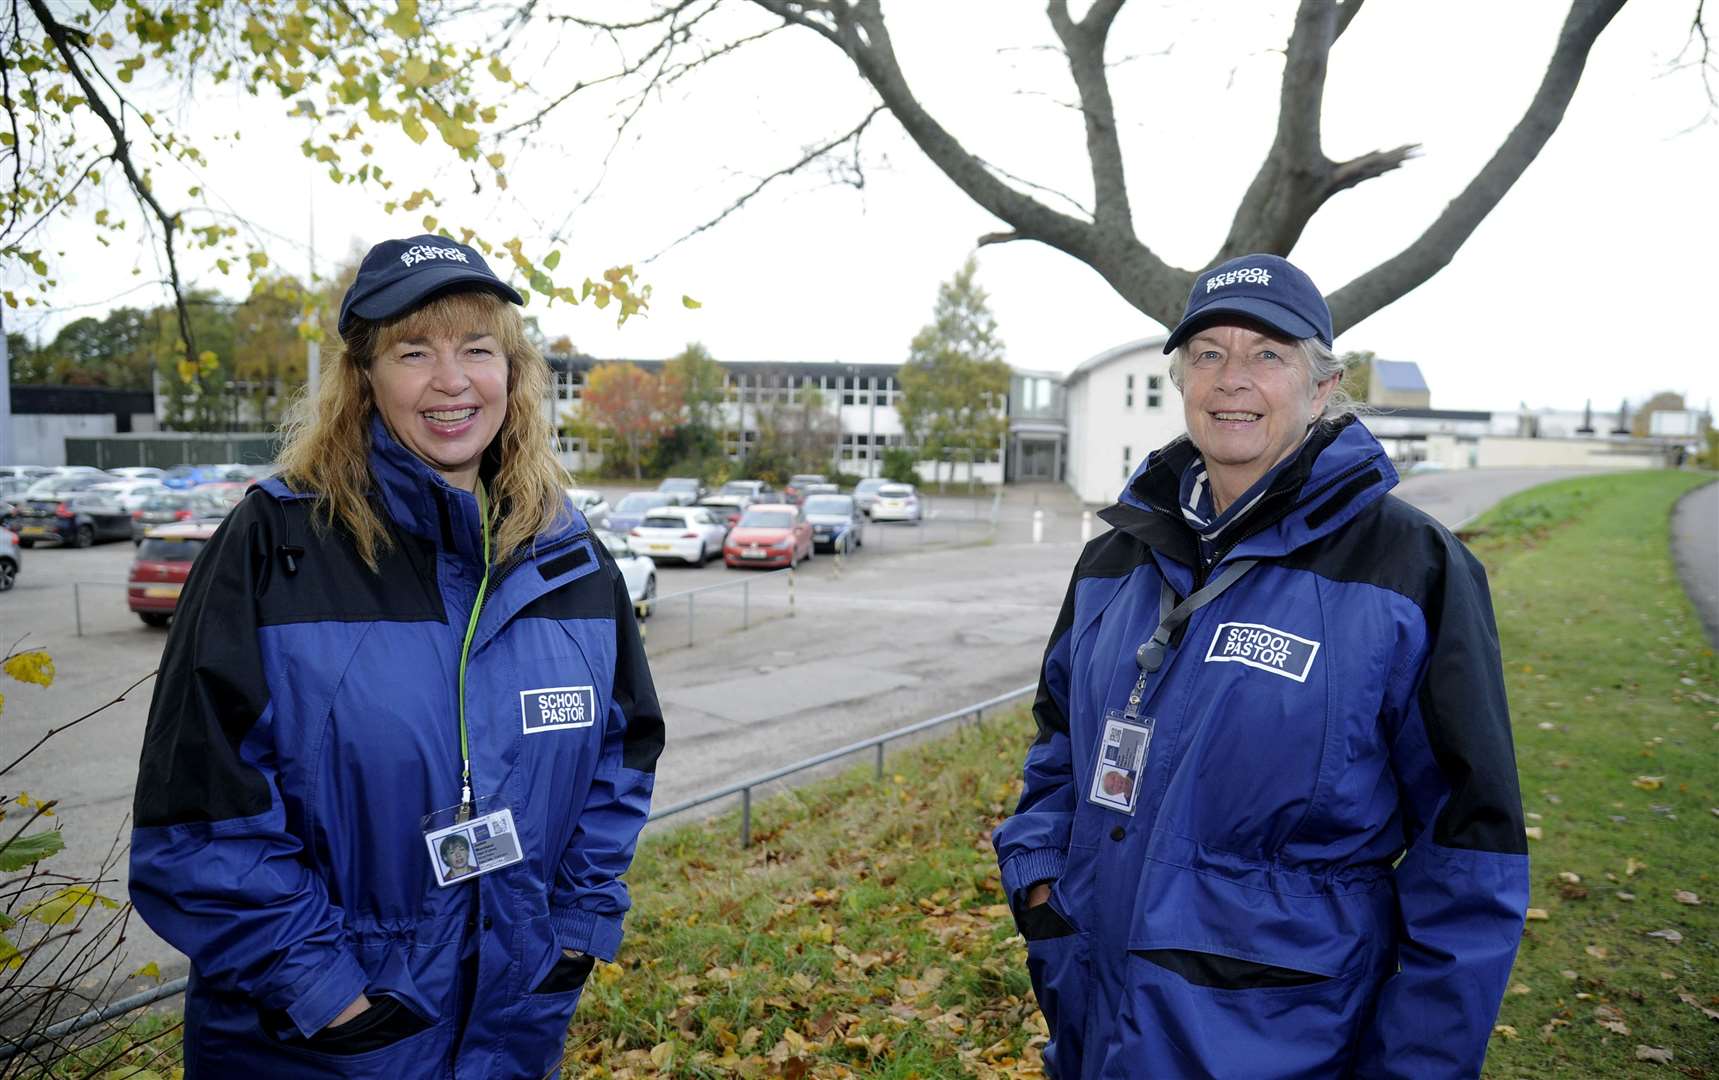 Anne Priest and Judi Moreland are taking part in a sponsored walk to raise funds.